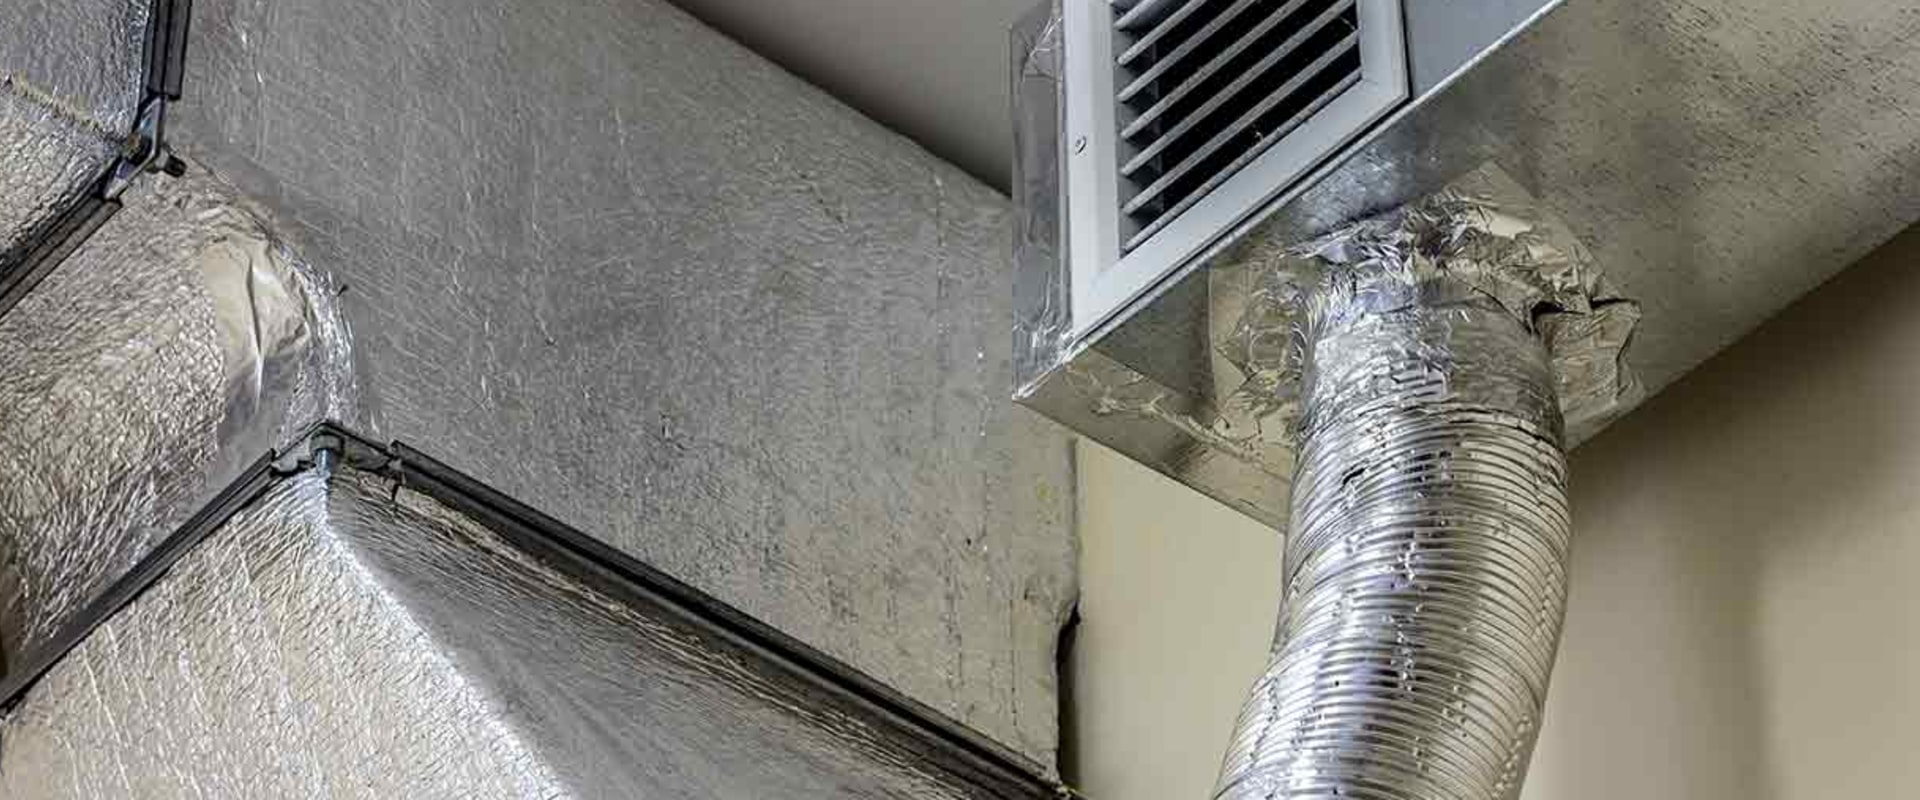 Sealing Your Air Ducts Yourself: Is an Air Compressor the Right Option?